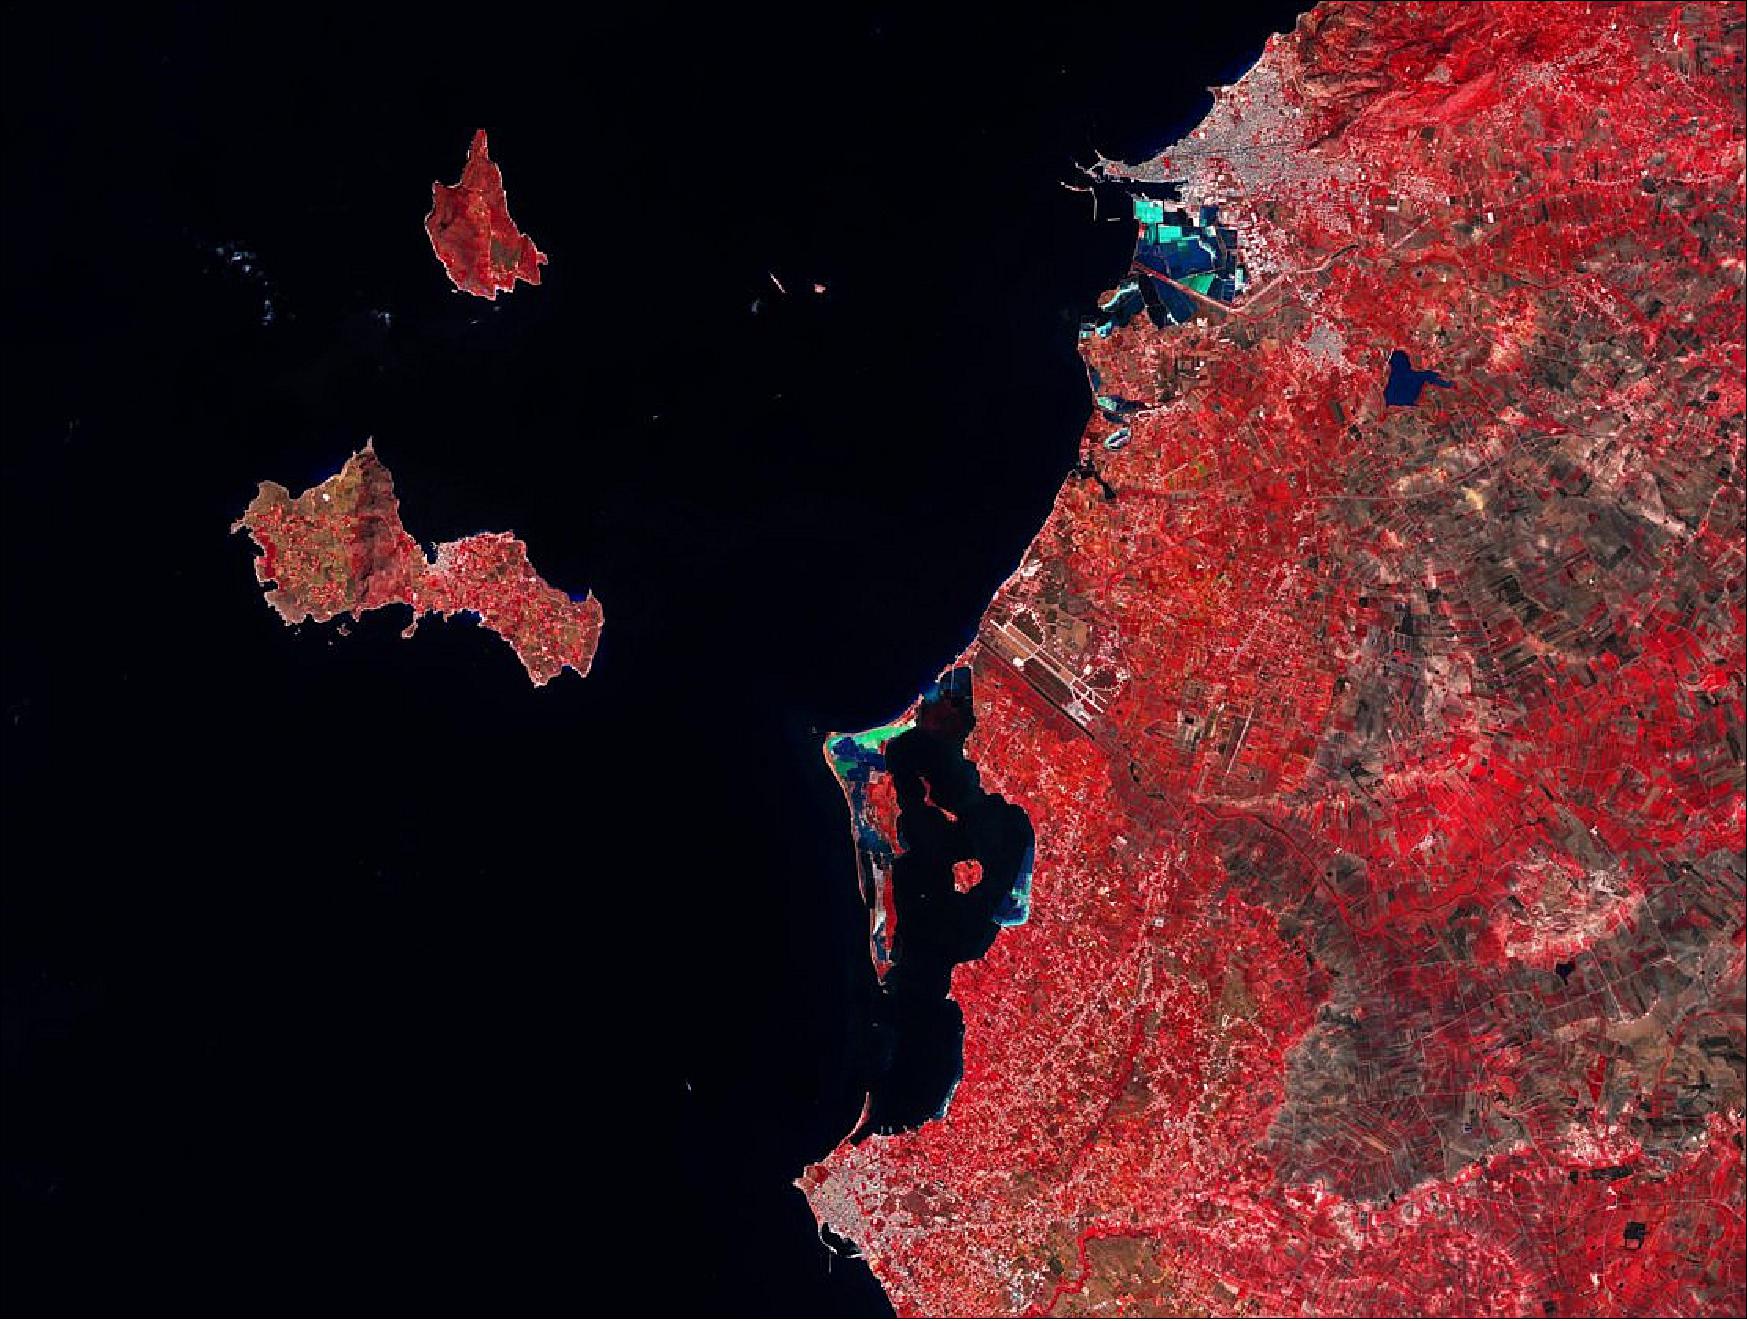 Figure 49: Captured on 3 September 2018 by the Copernicus Sentinel-2A satellite, this false-color image shows part of western Sicily in Italy and two of the main Aegadian Islands: Favignana and Levanzo. This image is also featured on the Earth from Space video program (image credit: ESA, the image contains modified Copernicus Sentinel data (2018), processed by ESA, CC BY-SA 3.0 IGO)